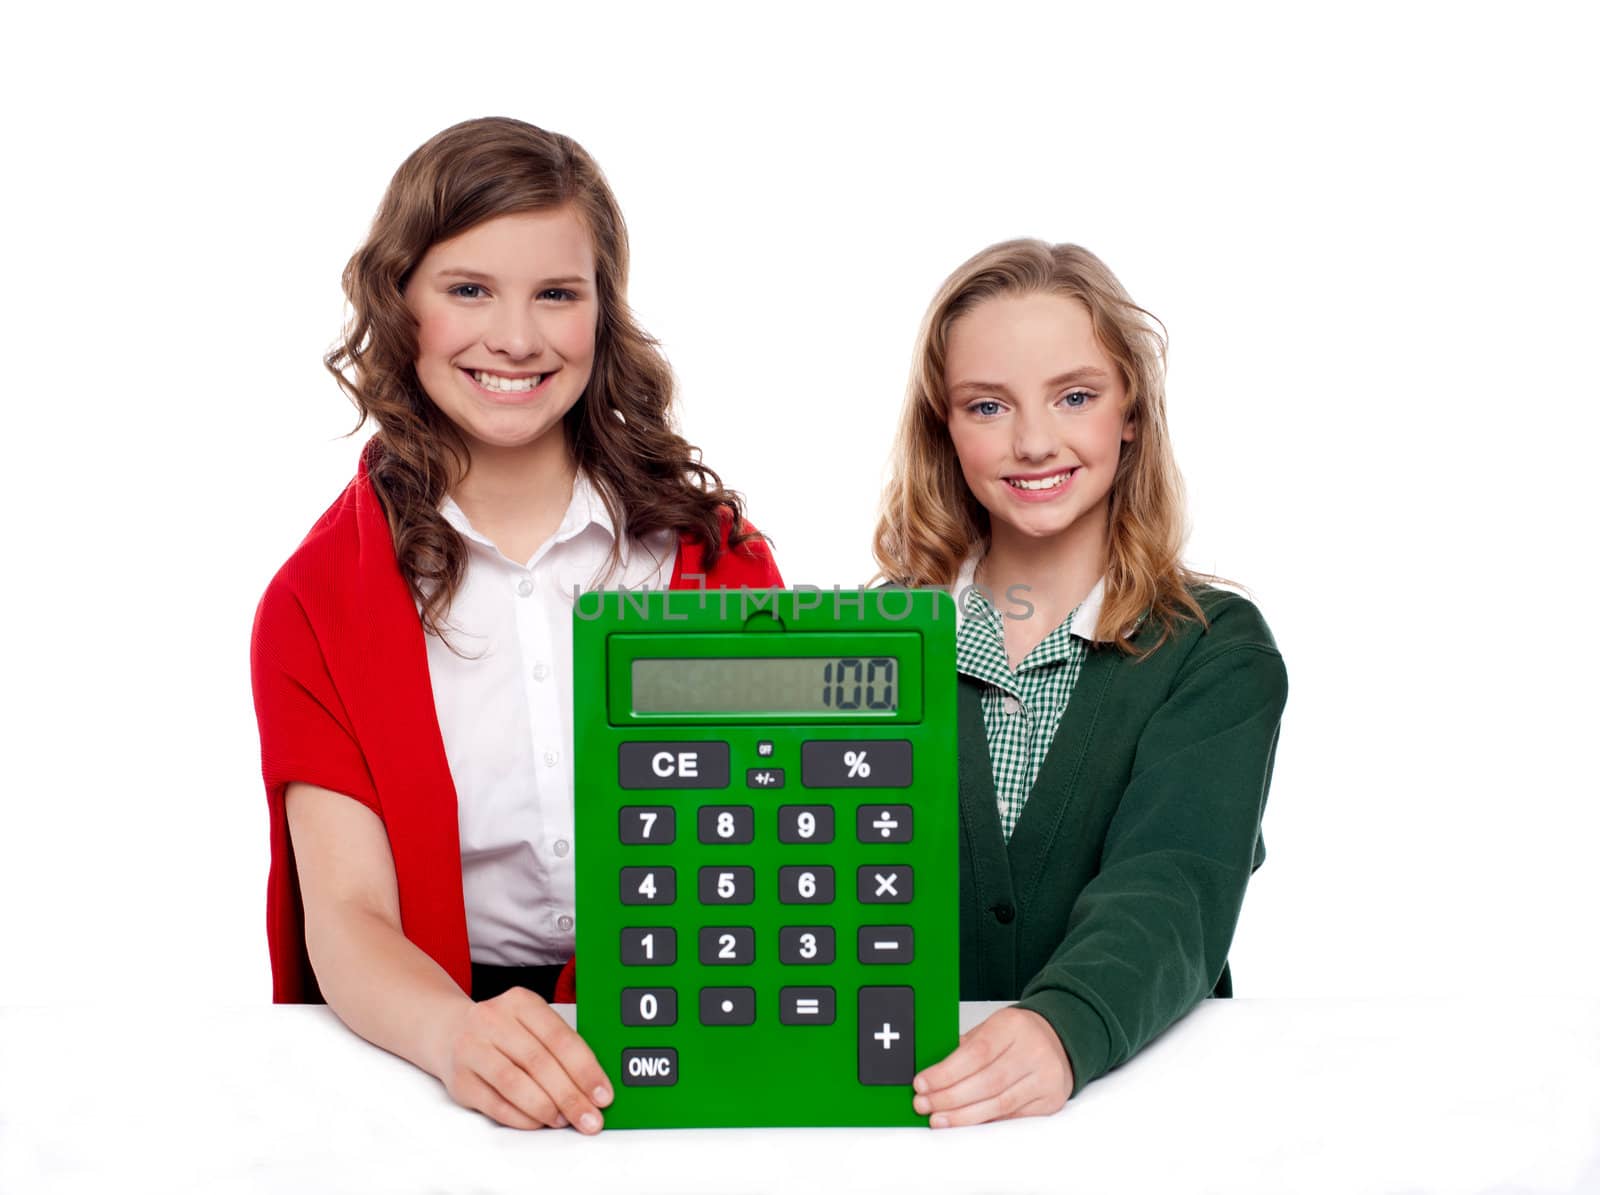 Girls showing big green calculator to camera by stockyimages